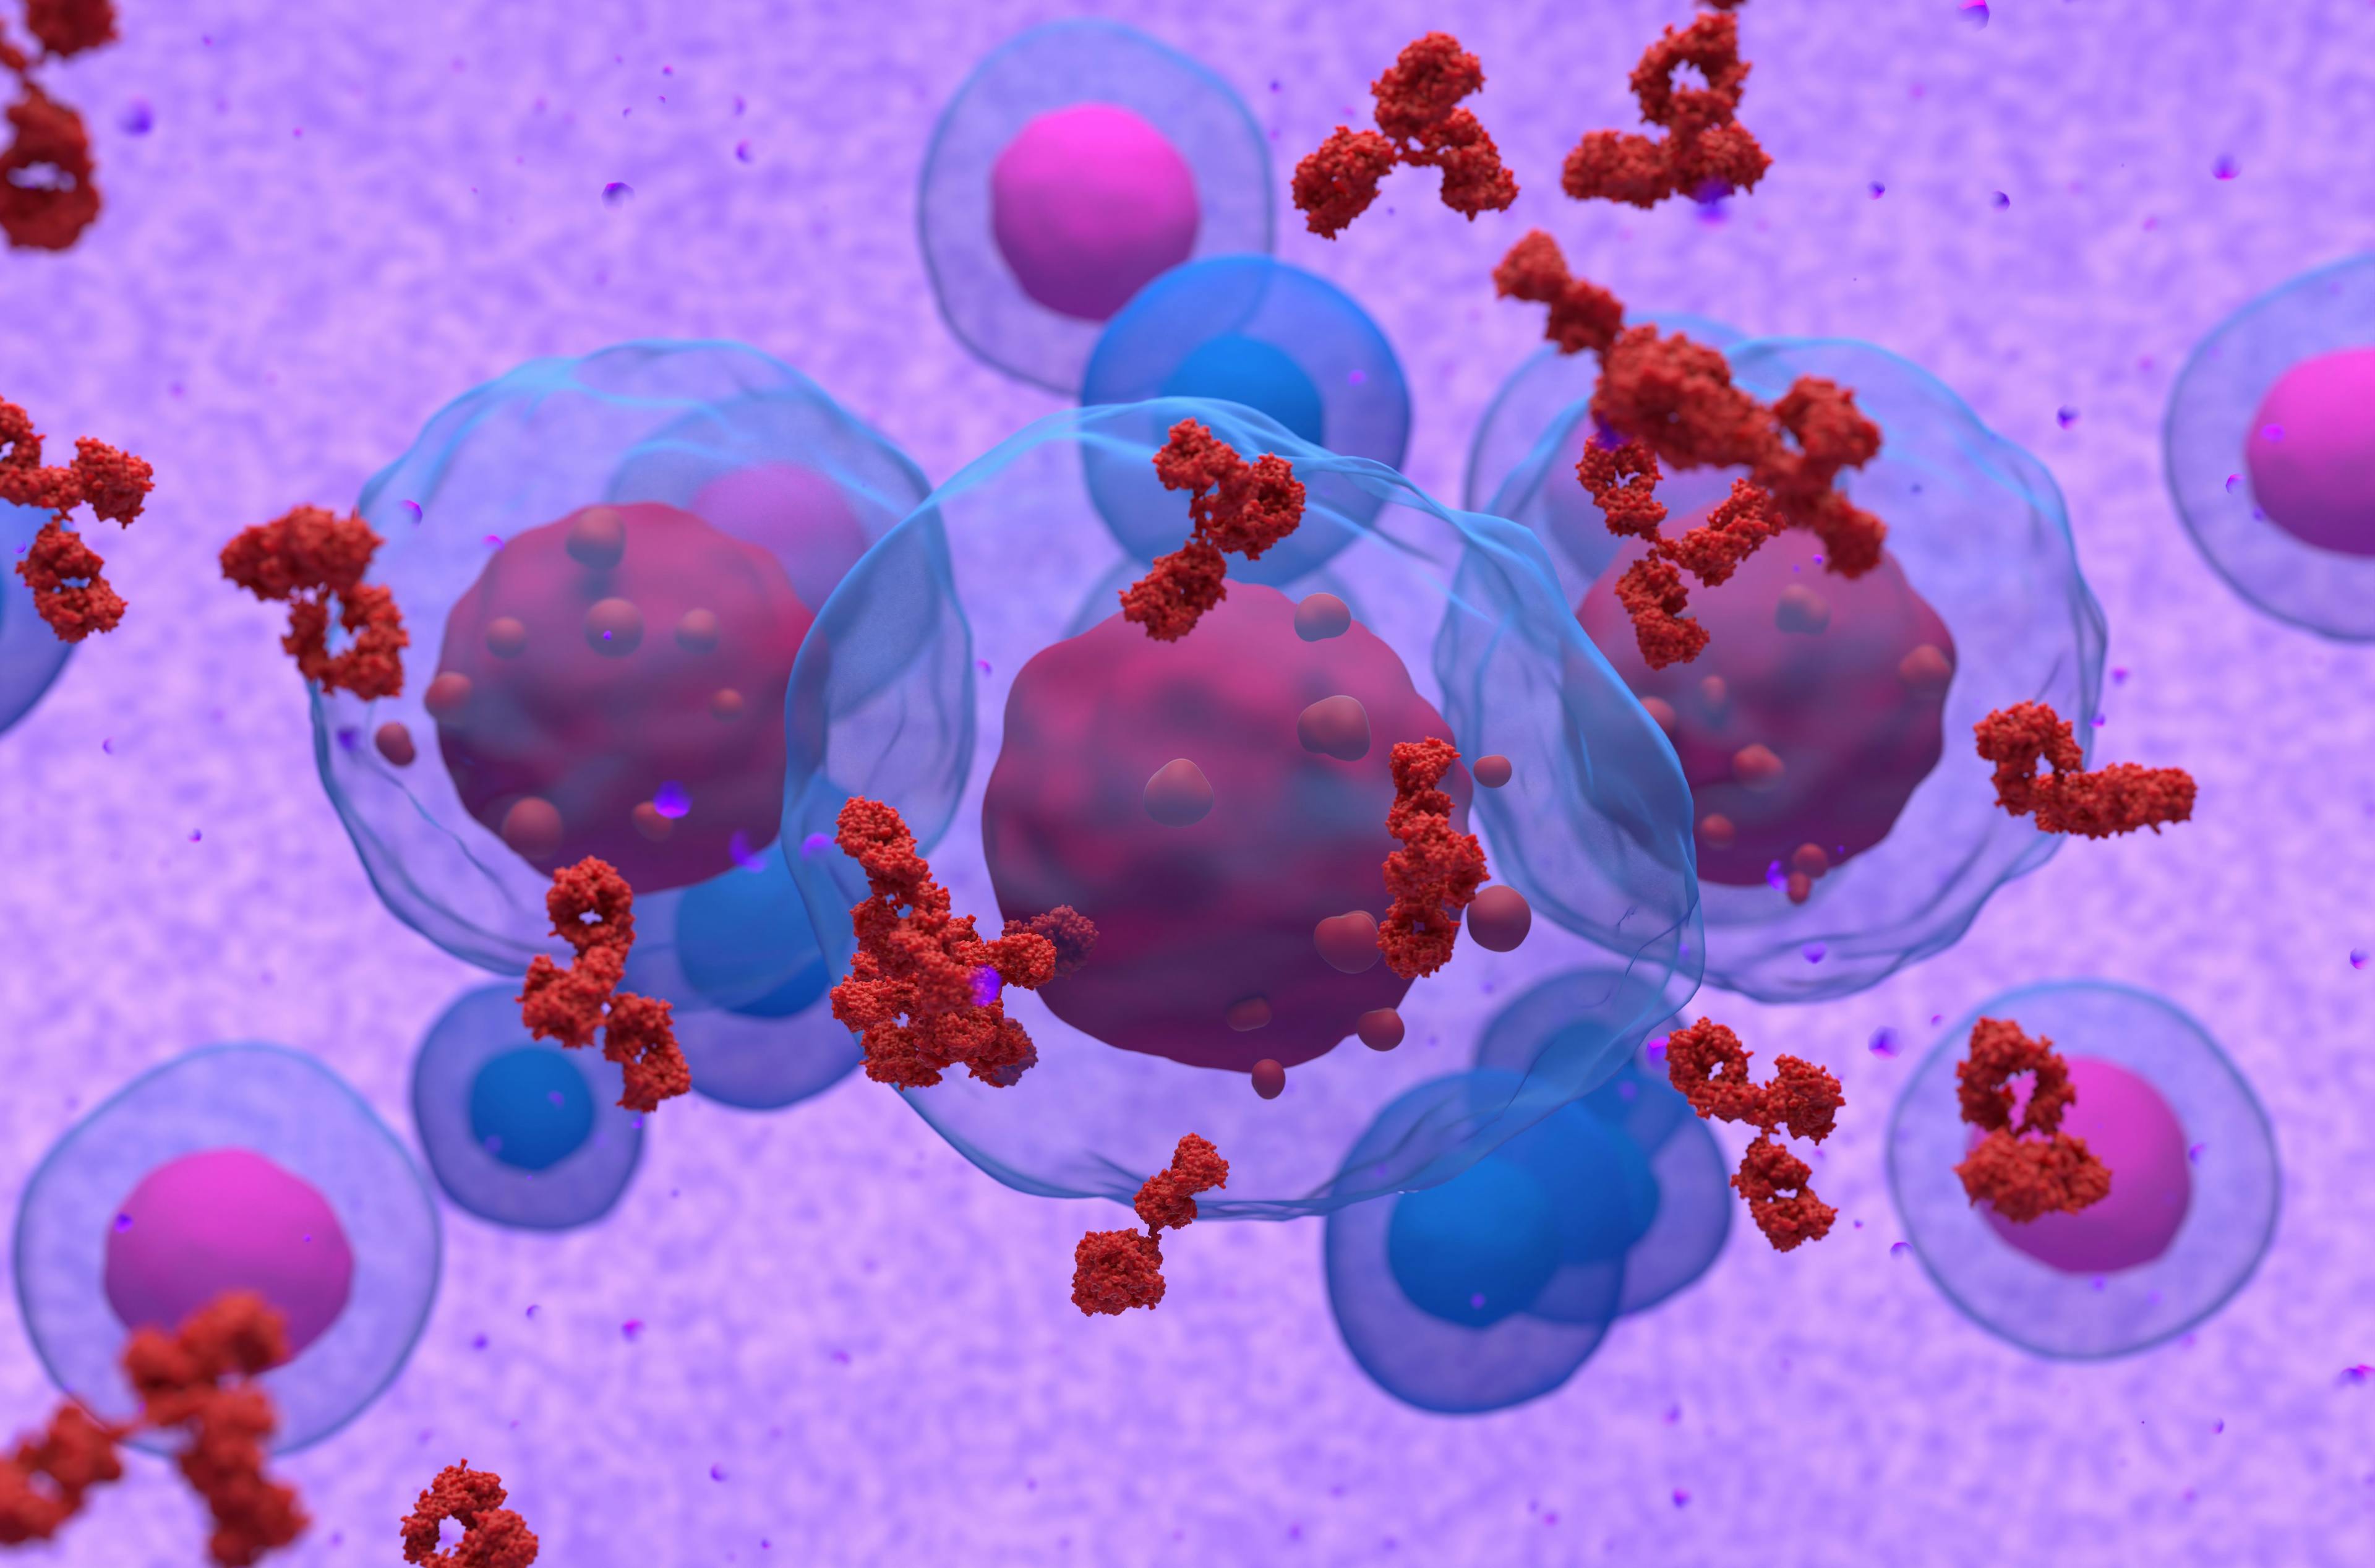 Abnormal plasma cell or b-cell in multiple myeloma emitting paraprotein | Image Credit: LASZLO - stock.adobe.com